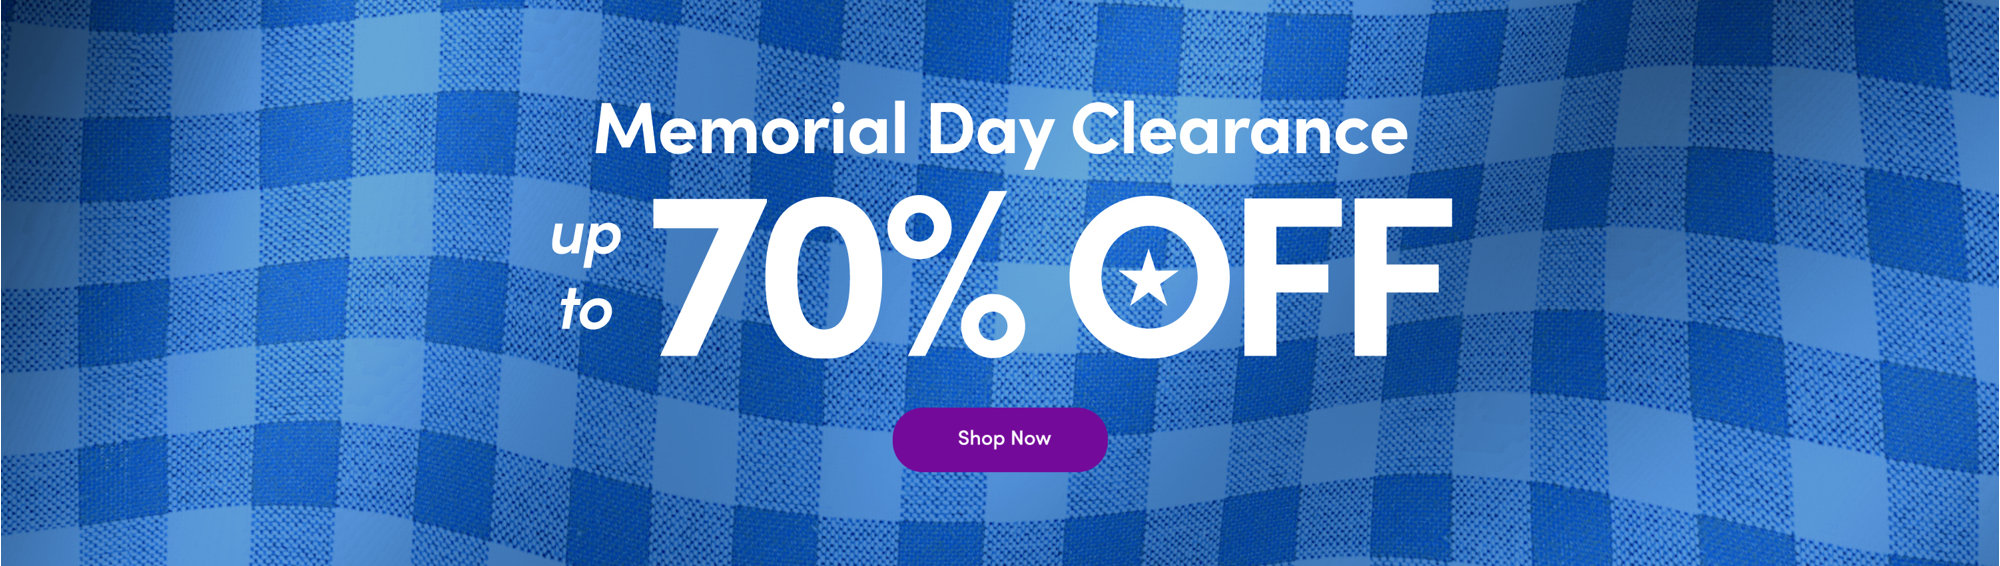 Memorial Day Clearance up to 70% OFF Shop Now